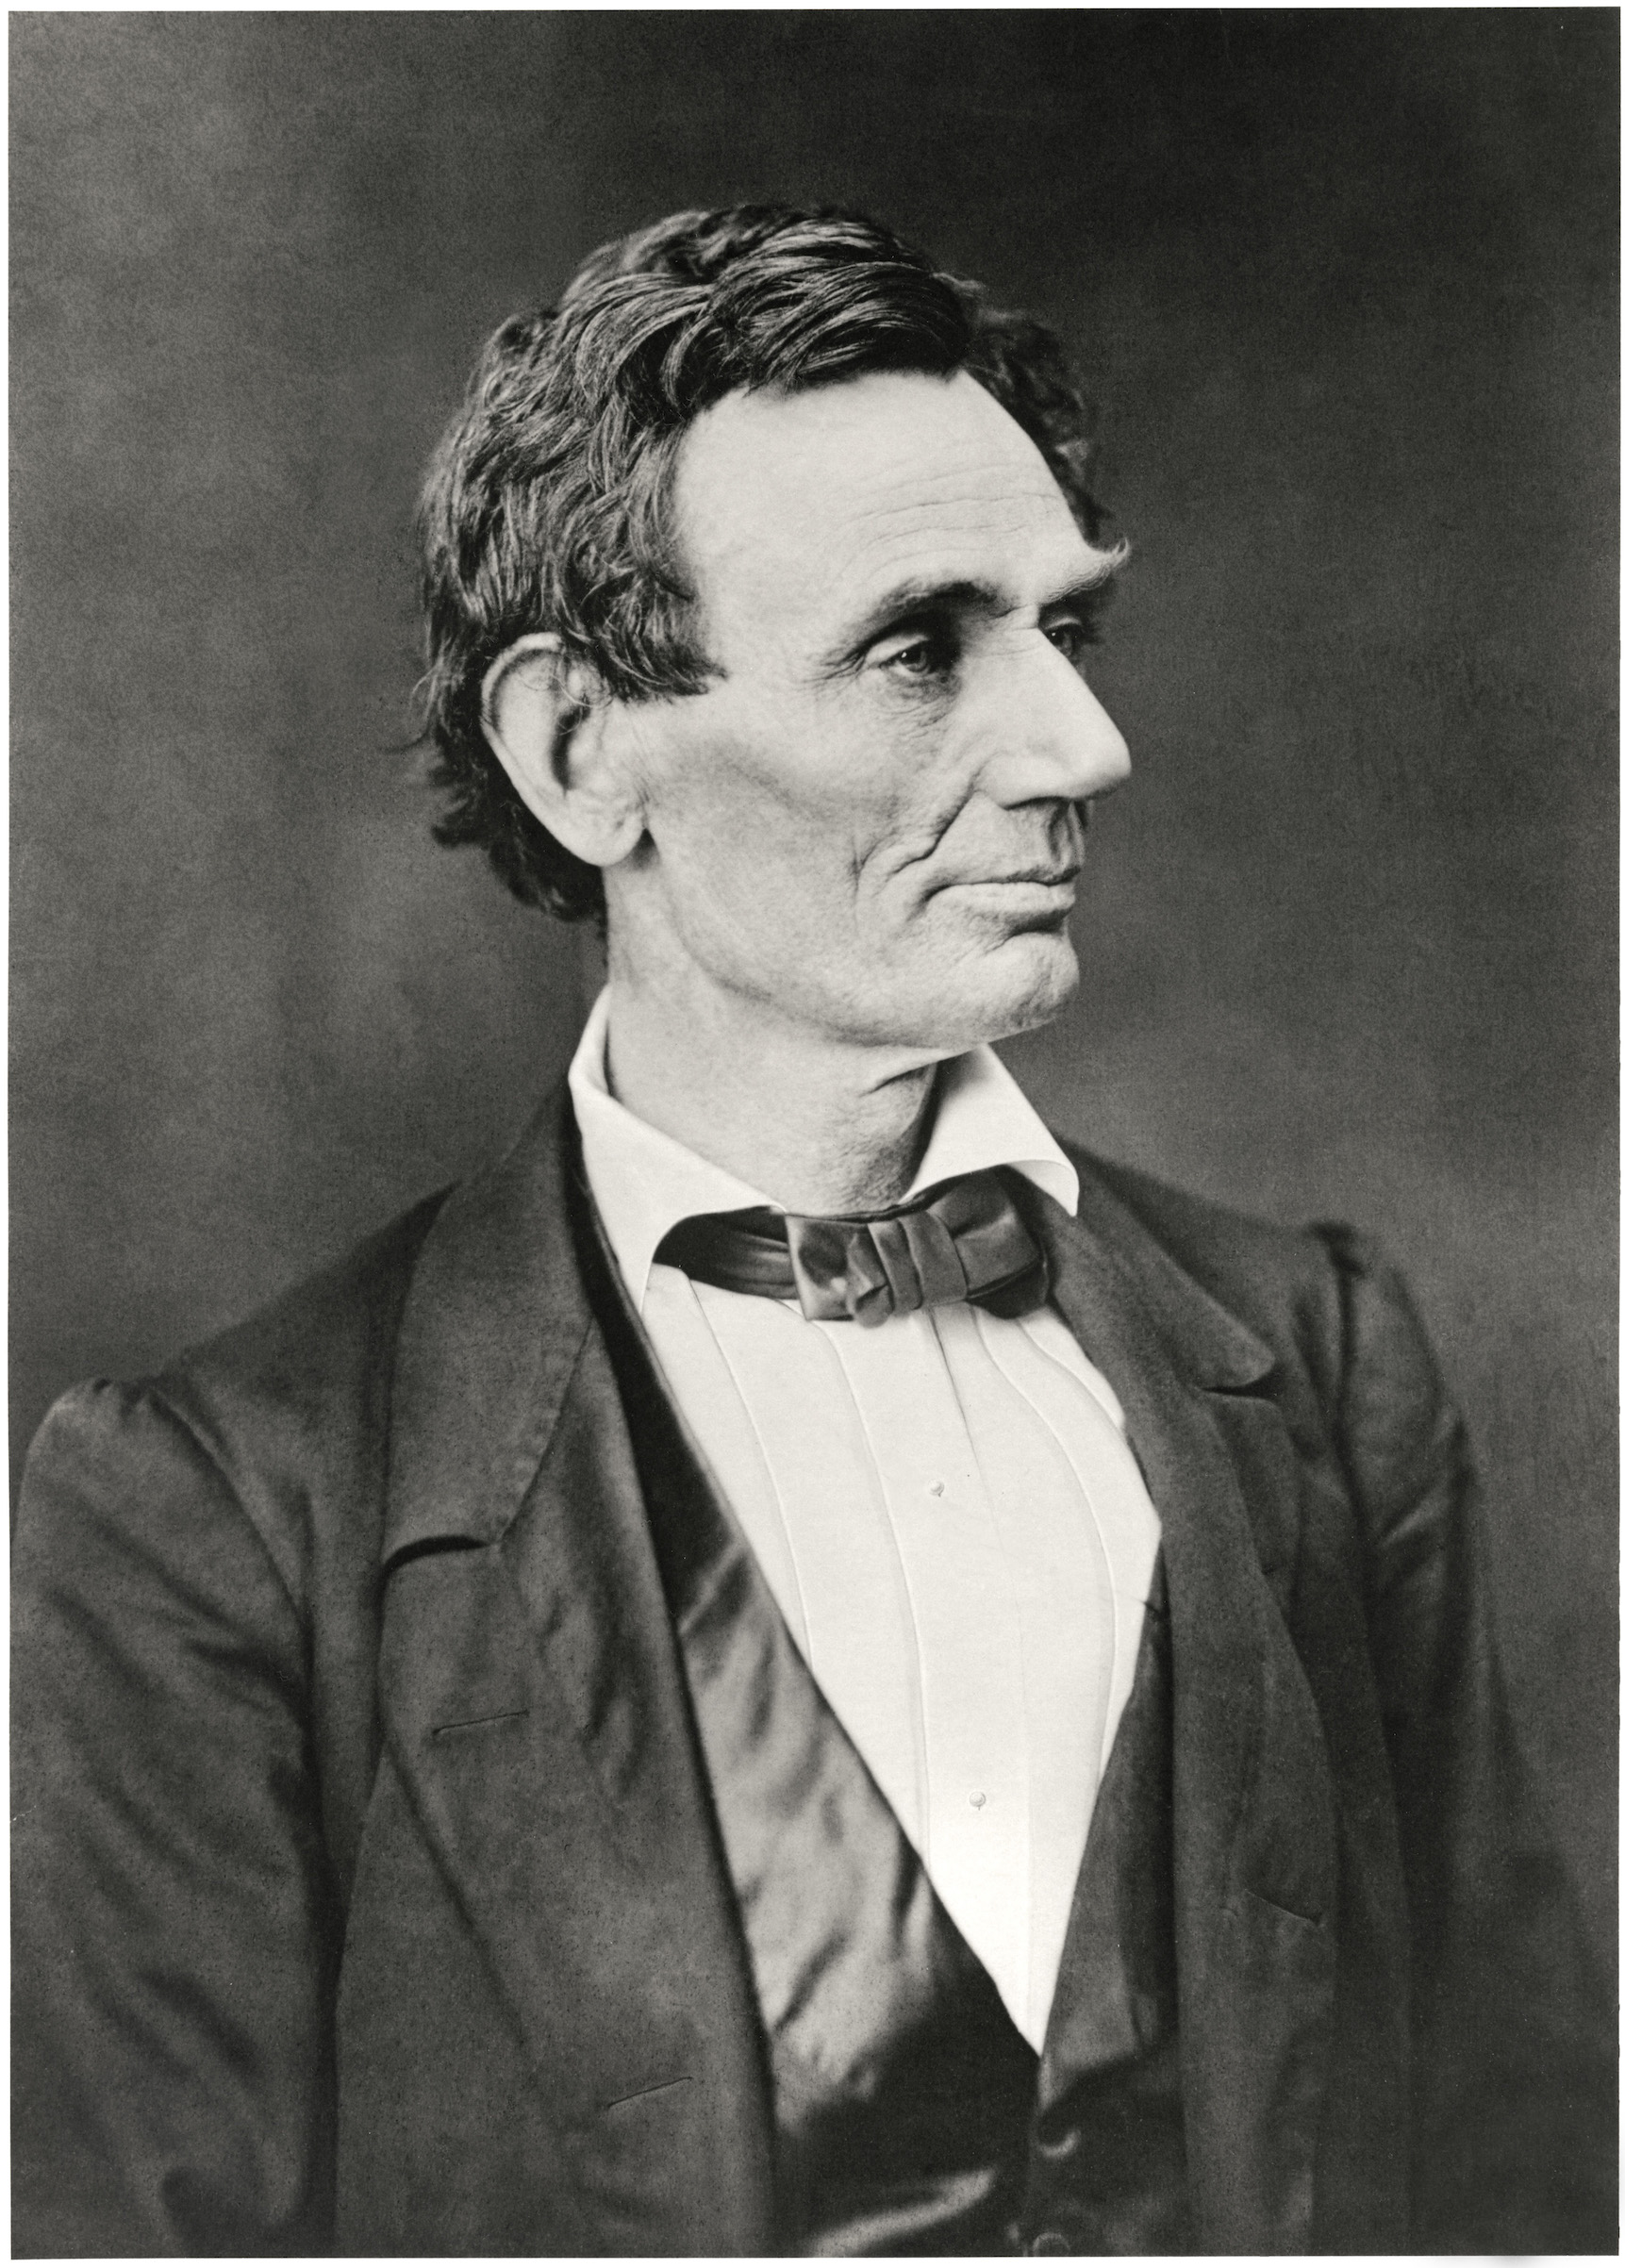 Abraham Lincoln (1809-1865), 16th President of the United States, Portrait as Lawyer, 1832. (Universal History Archive/Getty Images)